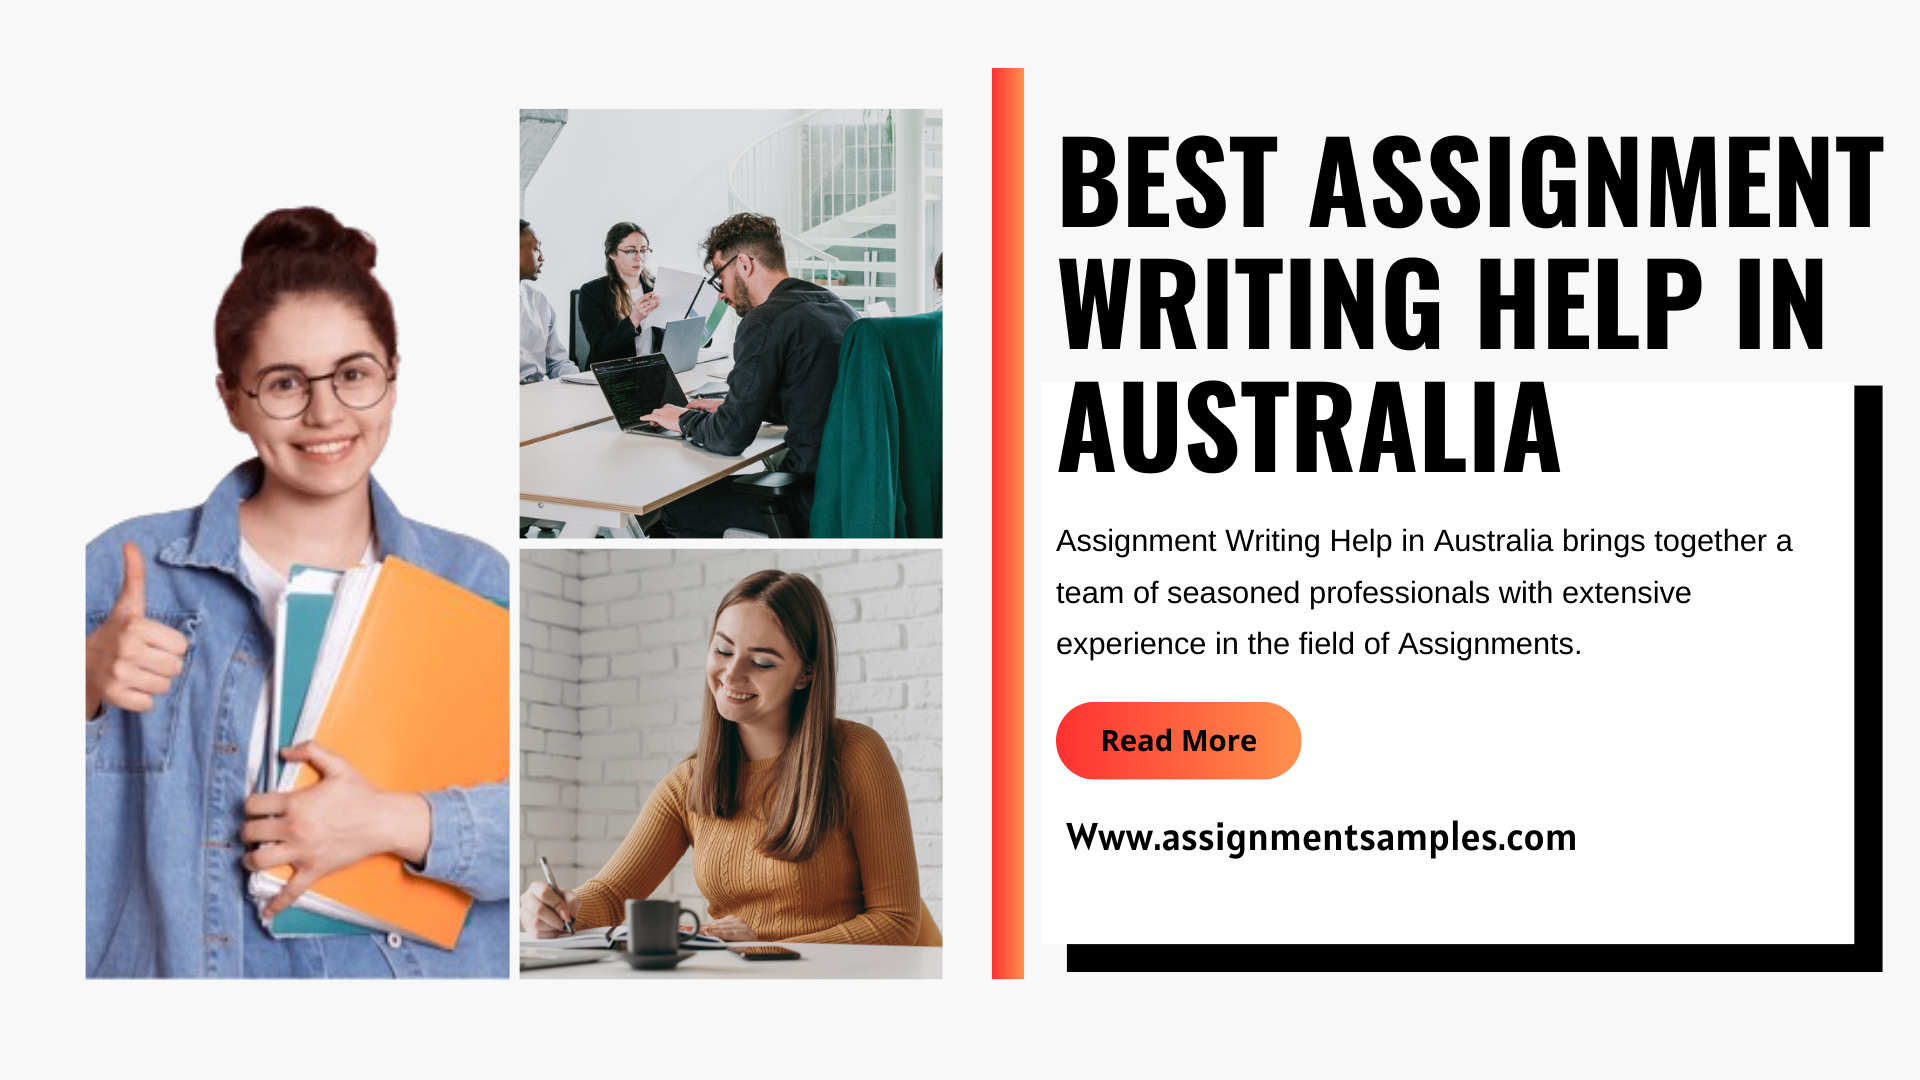 Top Assignment Writing Help in Australia – No.1 Talented Writers✅